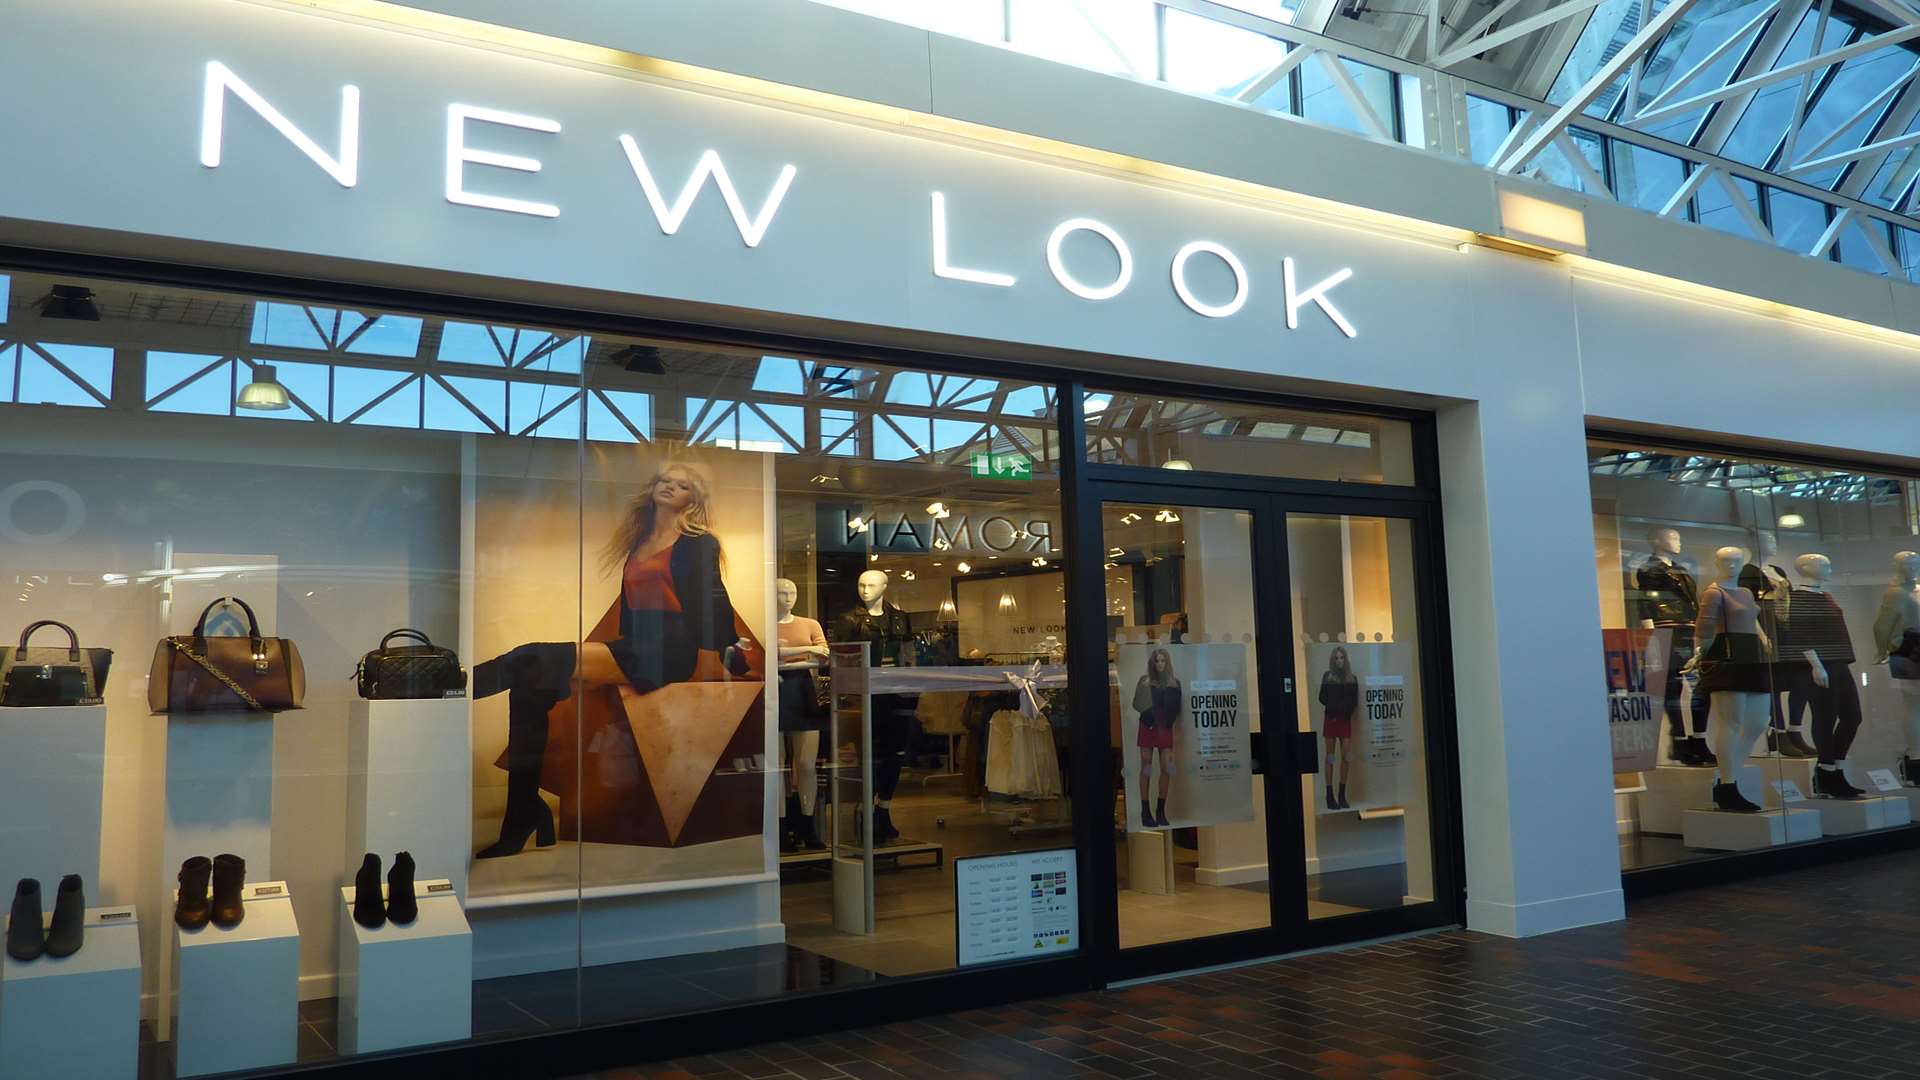 A bigger New Look store has opened at Hempstead Valley Shopping Centre